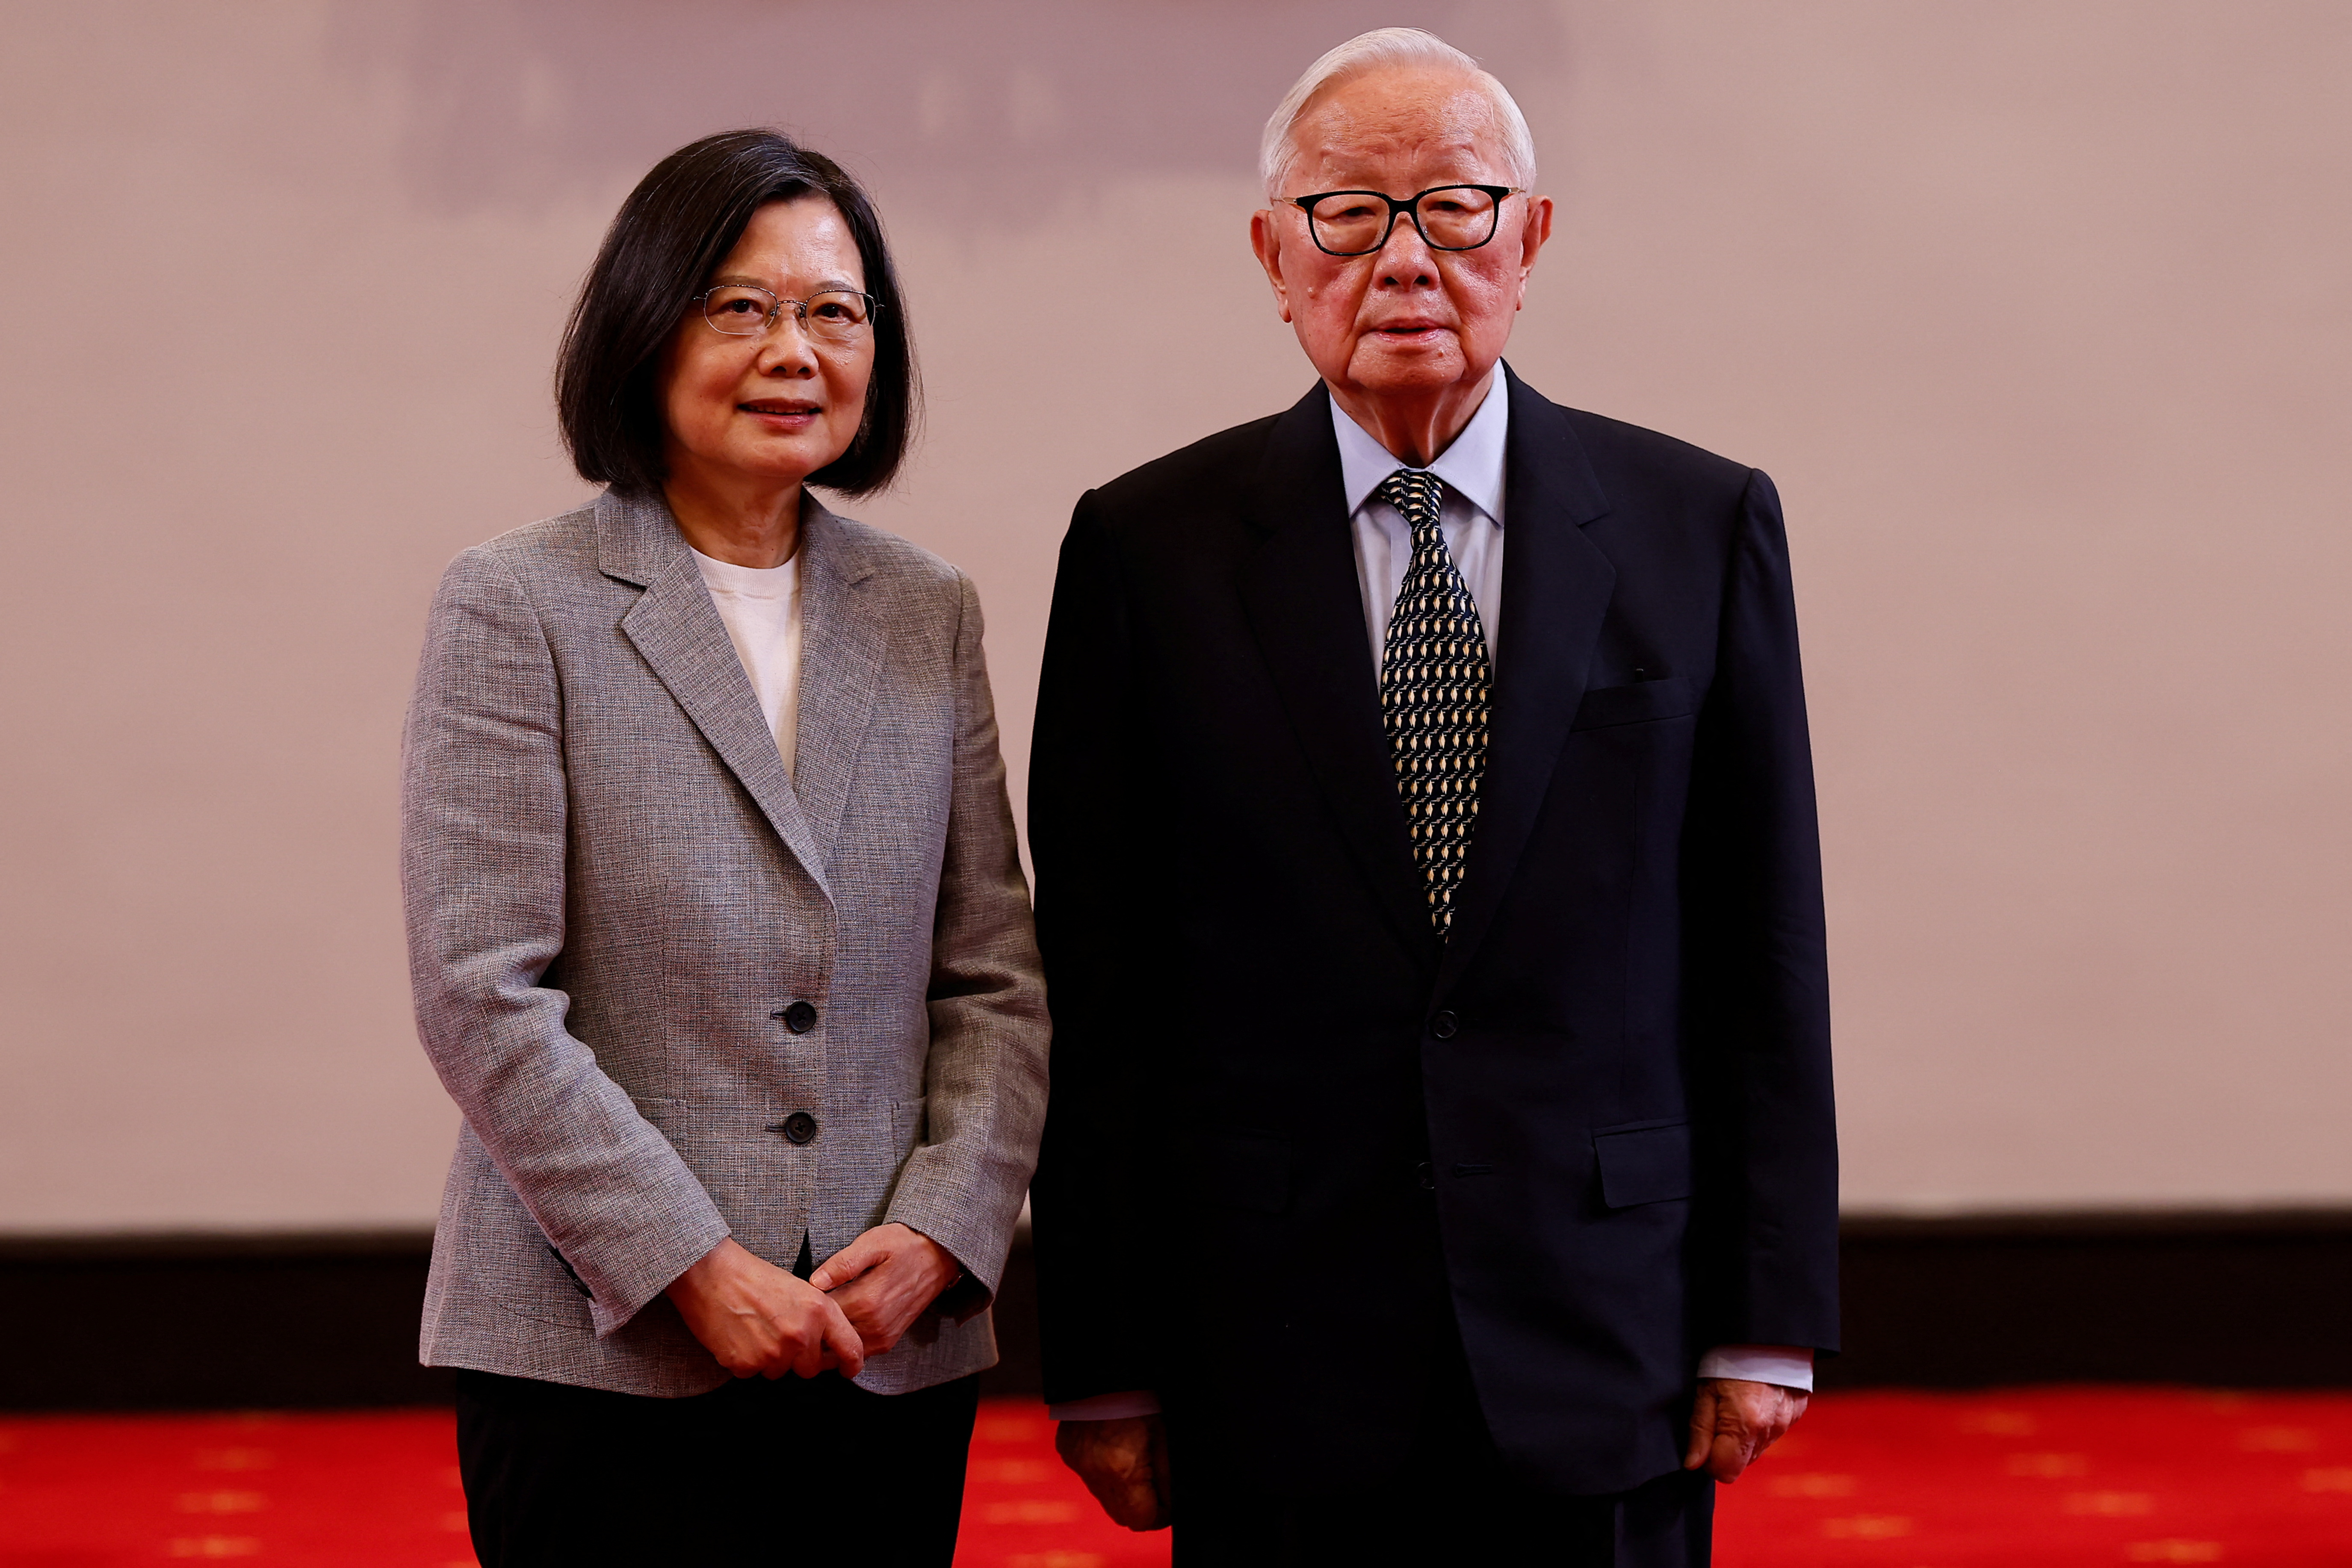 Taiwan's President Tsai Ing-wen poses for a photo with Taiwan's APEC representative and TSMC founder Morris Chang at a press conference in Taipei,